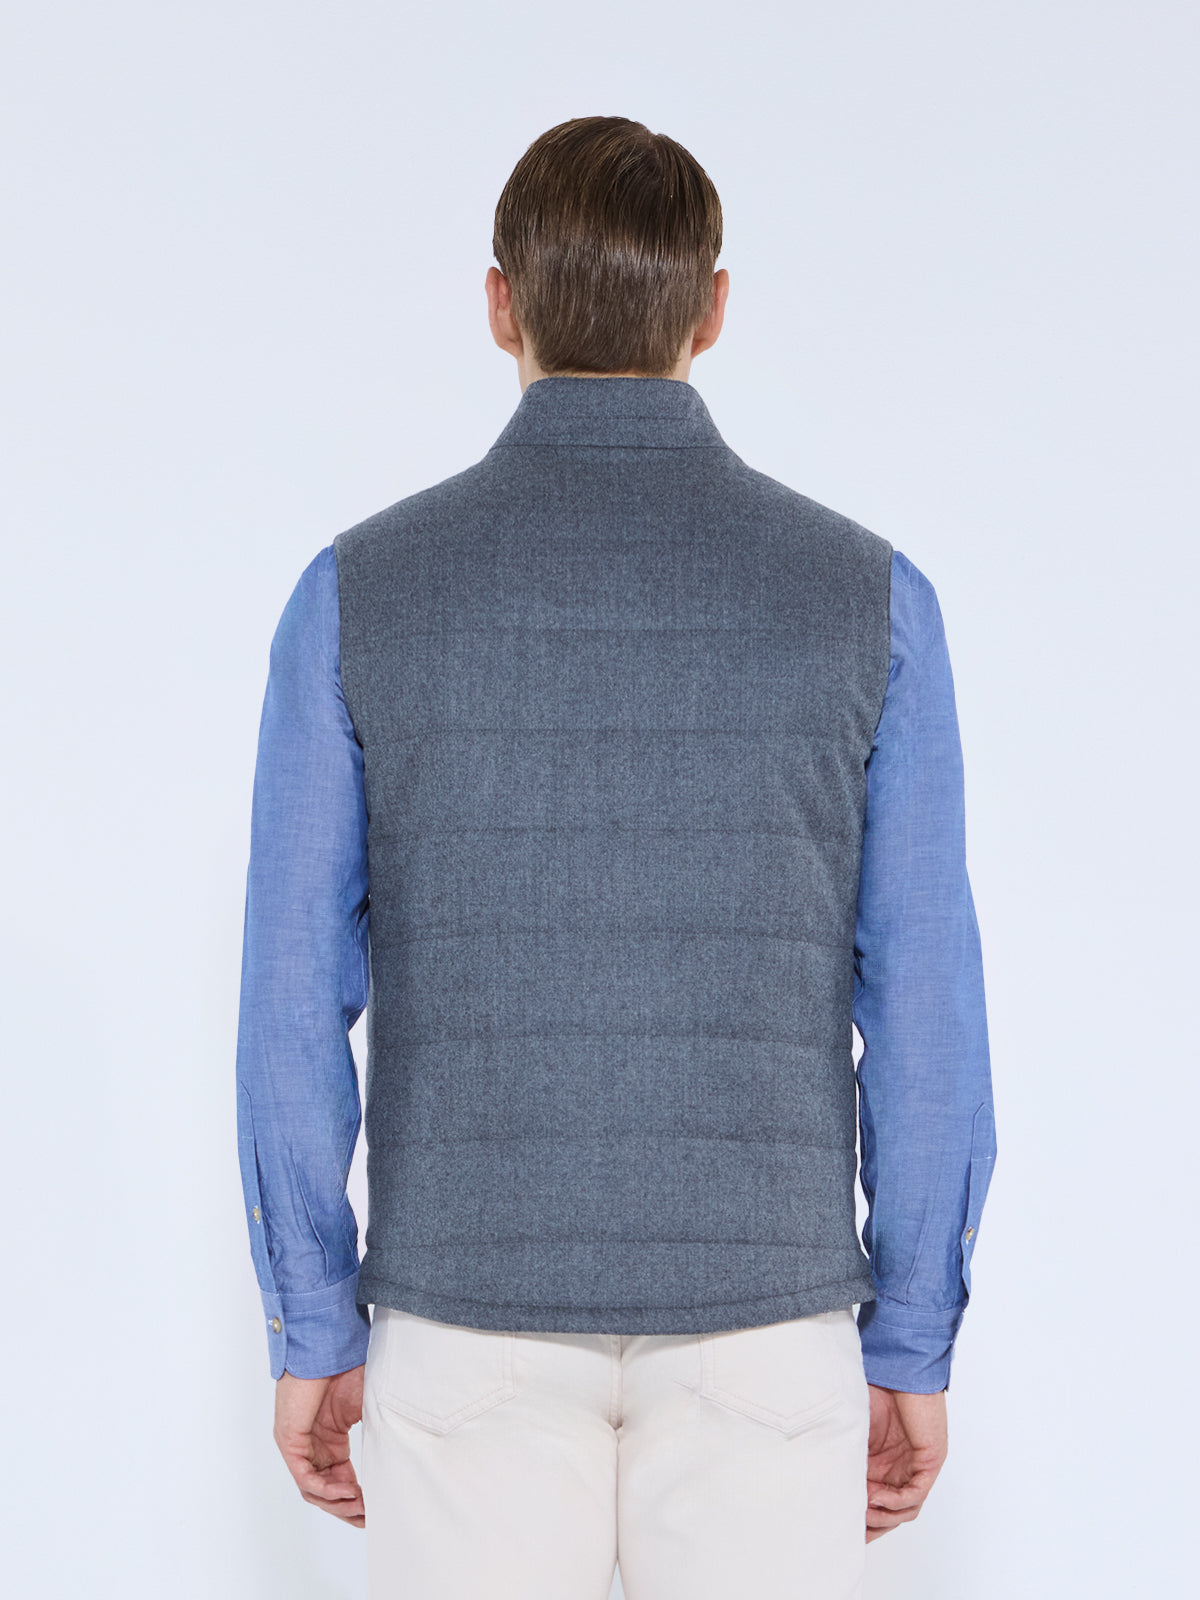 Heather Grey Quilted Flannel Vest